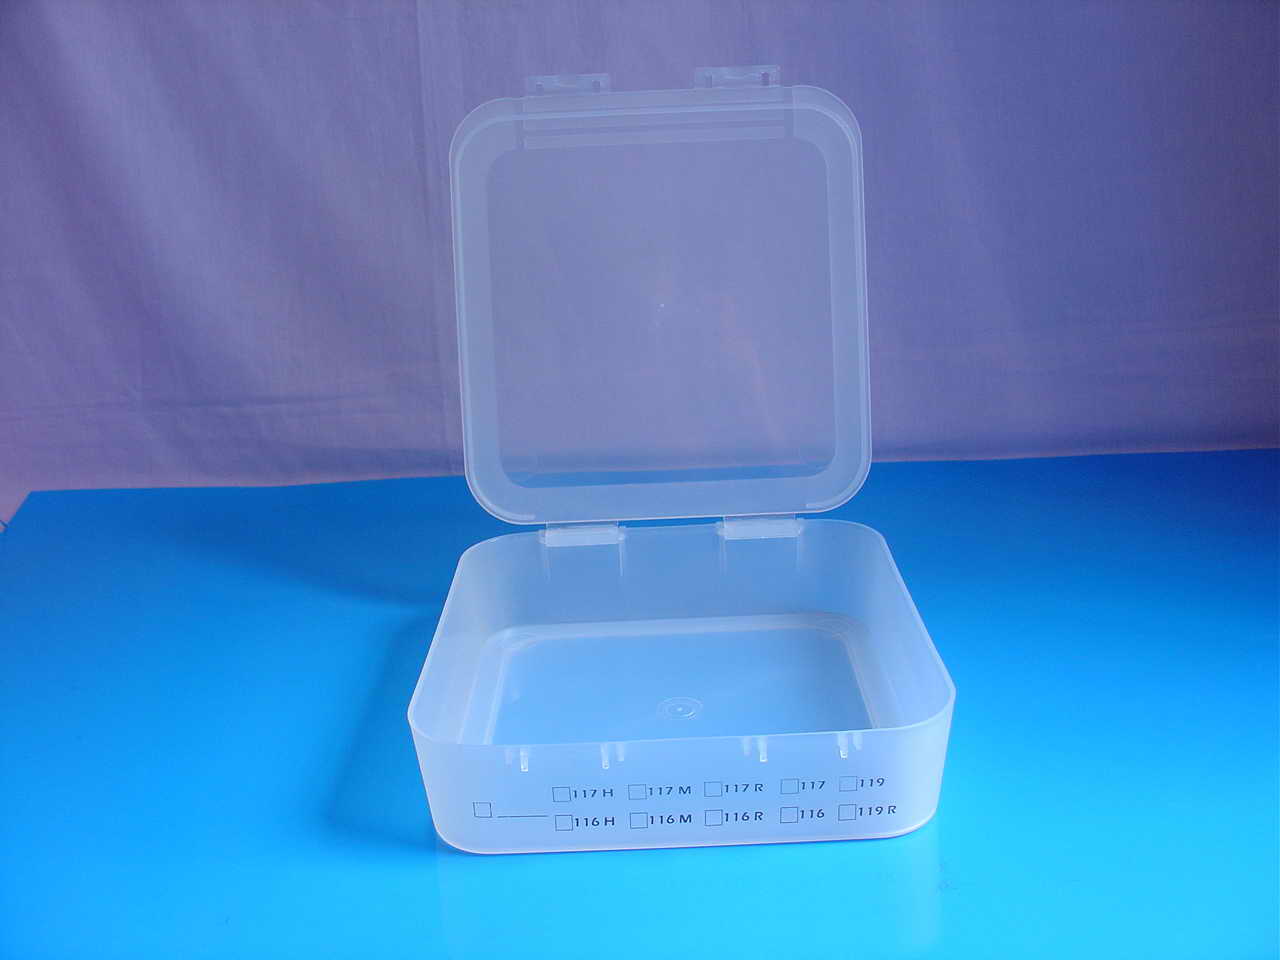 injection molde box,fishing tackle box,pp box,ps box,plastic container,fishing  tackle box,tooling box,plastic carrier,plastic revolving  turntables,turntables,revolving display,plastic shopping bag carrier,ps  turntables